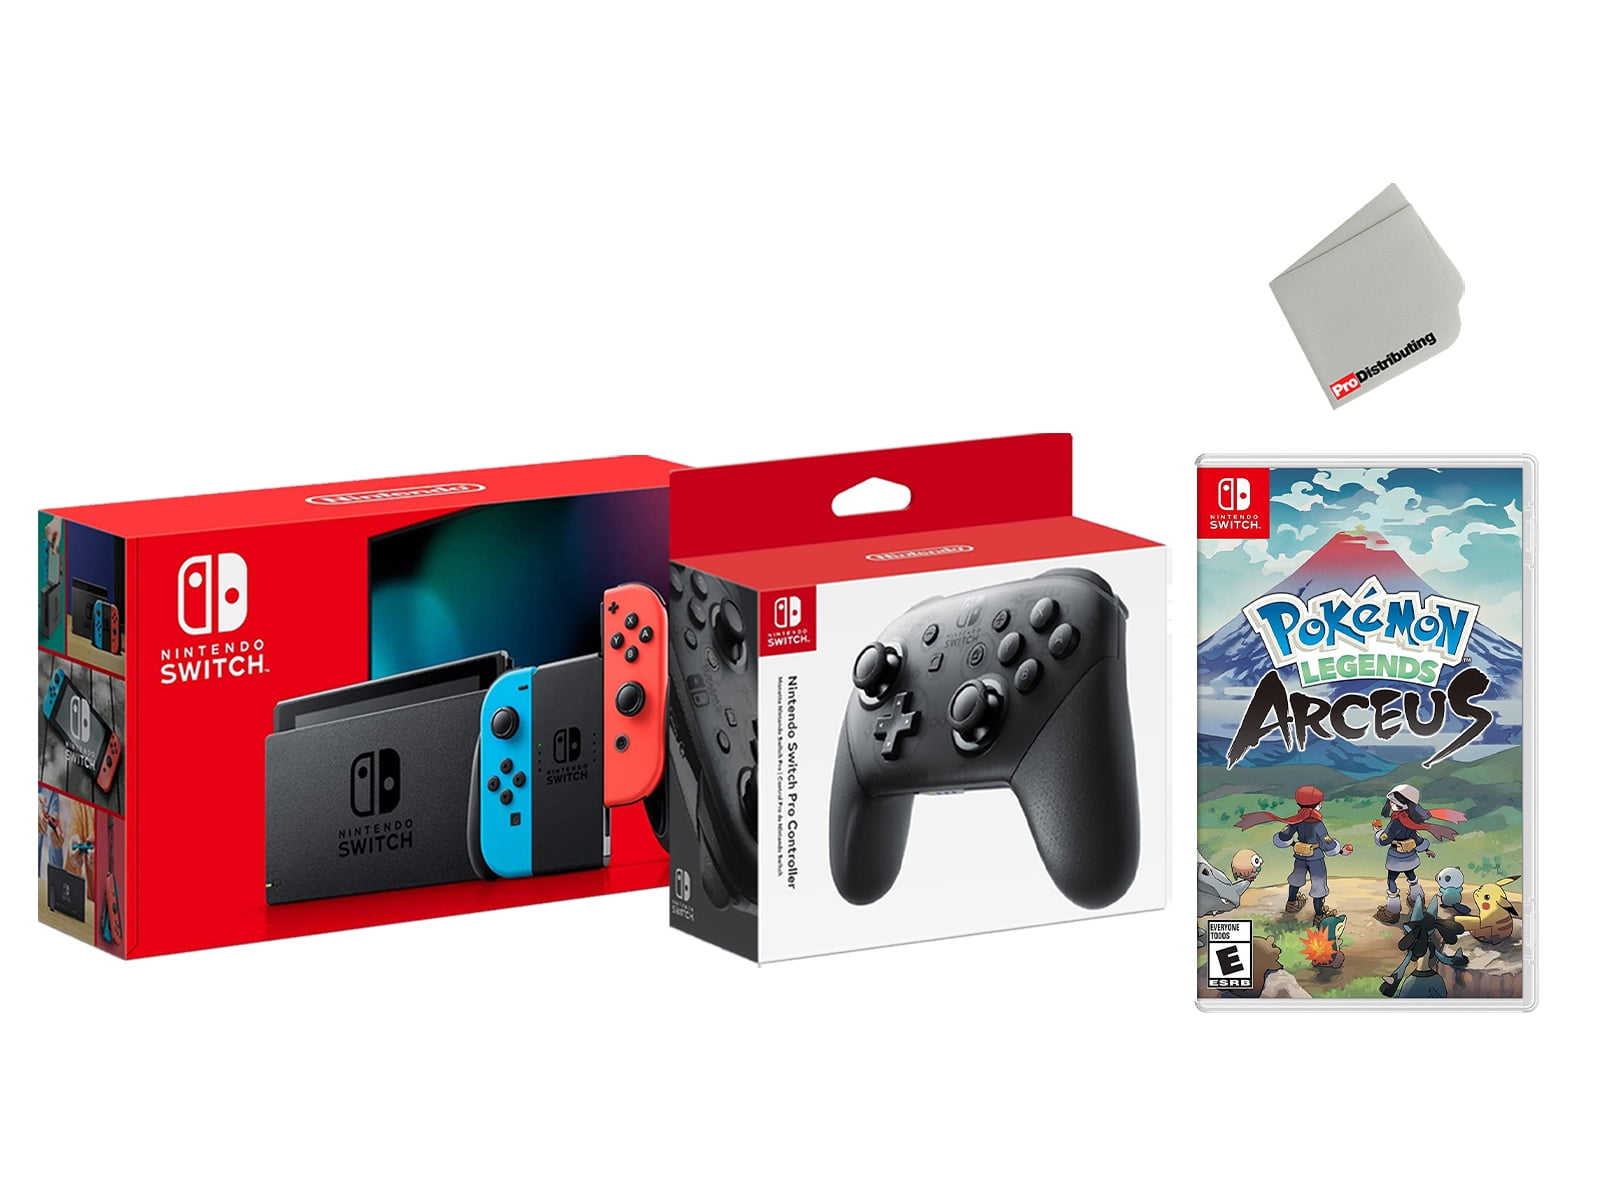 Pokemon Switch with Controller Import Game and Nintendo Wireless 32GB Console - Joy-Con Bundle Neon Pro Legends US with Arceus Plug